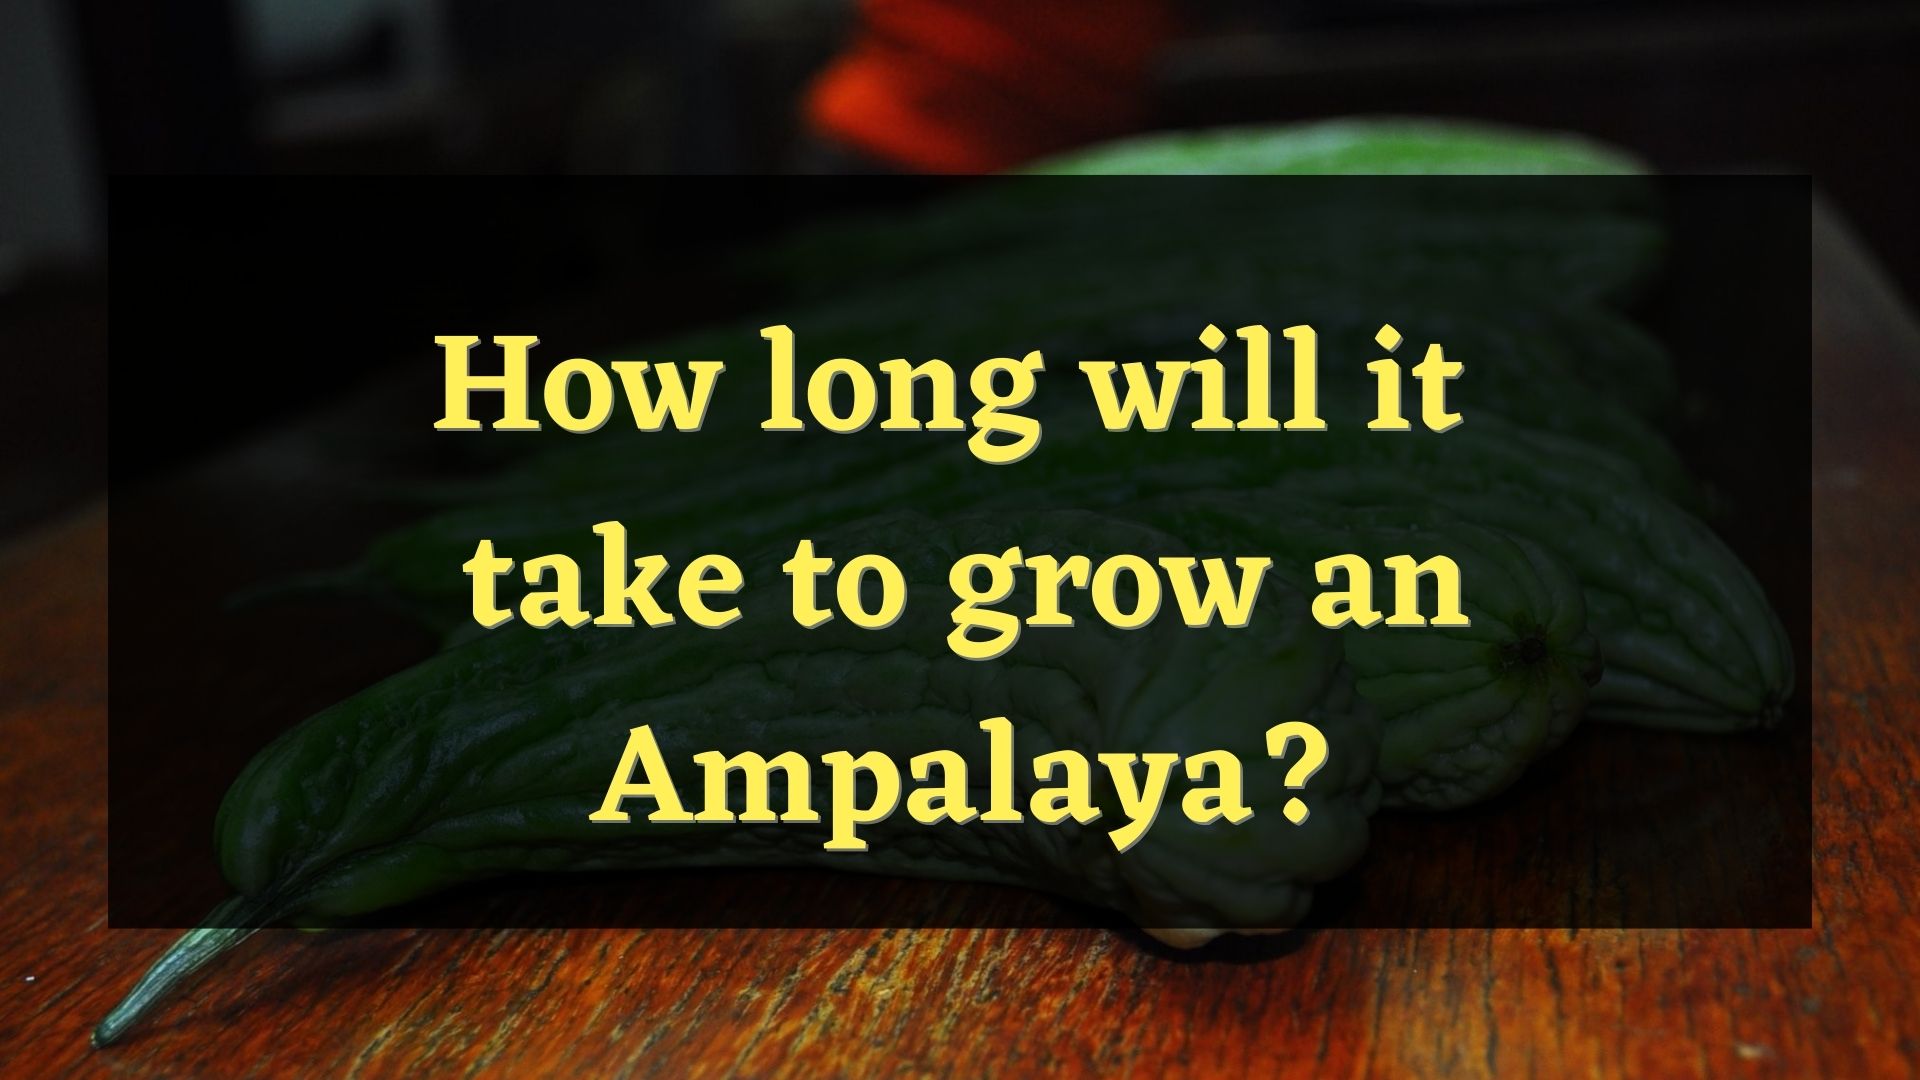 How Long Does it Take for an Ampalaya to Grow